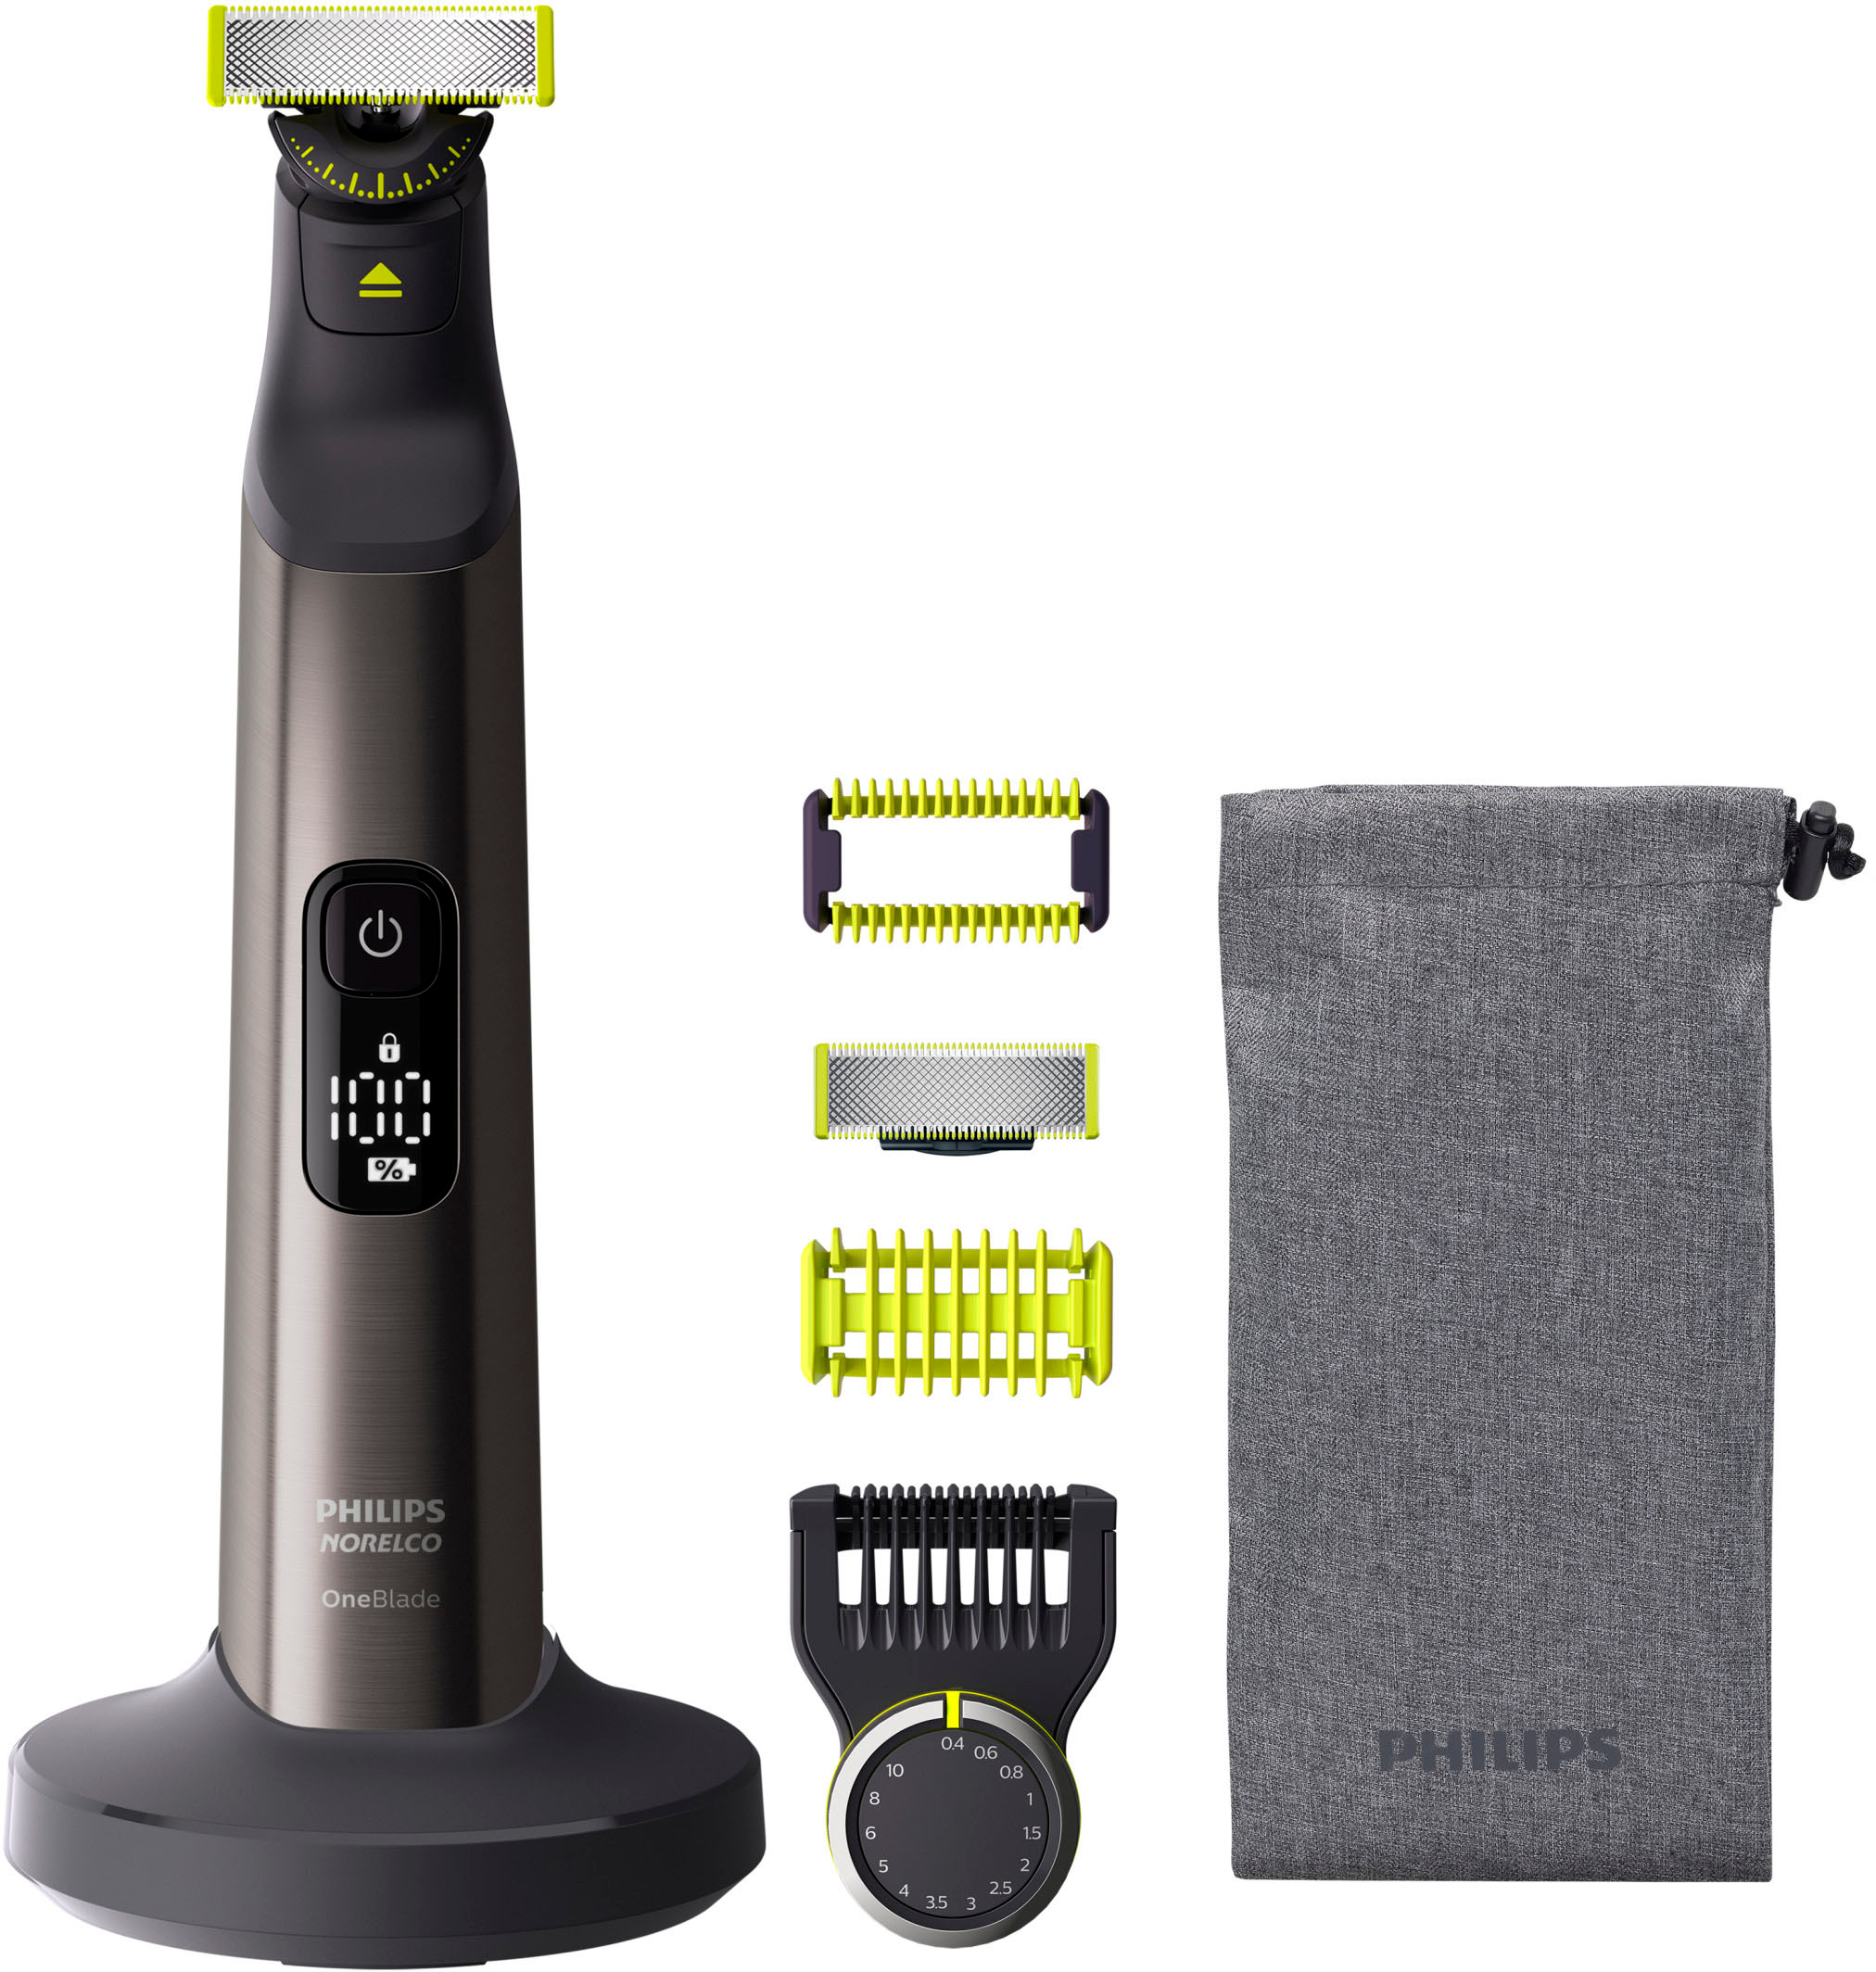 Summit pregnant Restate Philips Norelco Philips Norelco, OneBlade 360, Pro Face & Body, Hybrid  Electric Trimmer and Shaver, QP6551/70 Chrome QP6551/70 - Best Buy